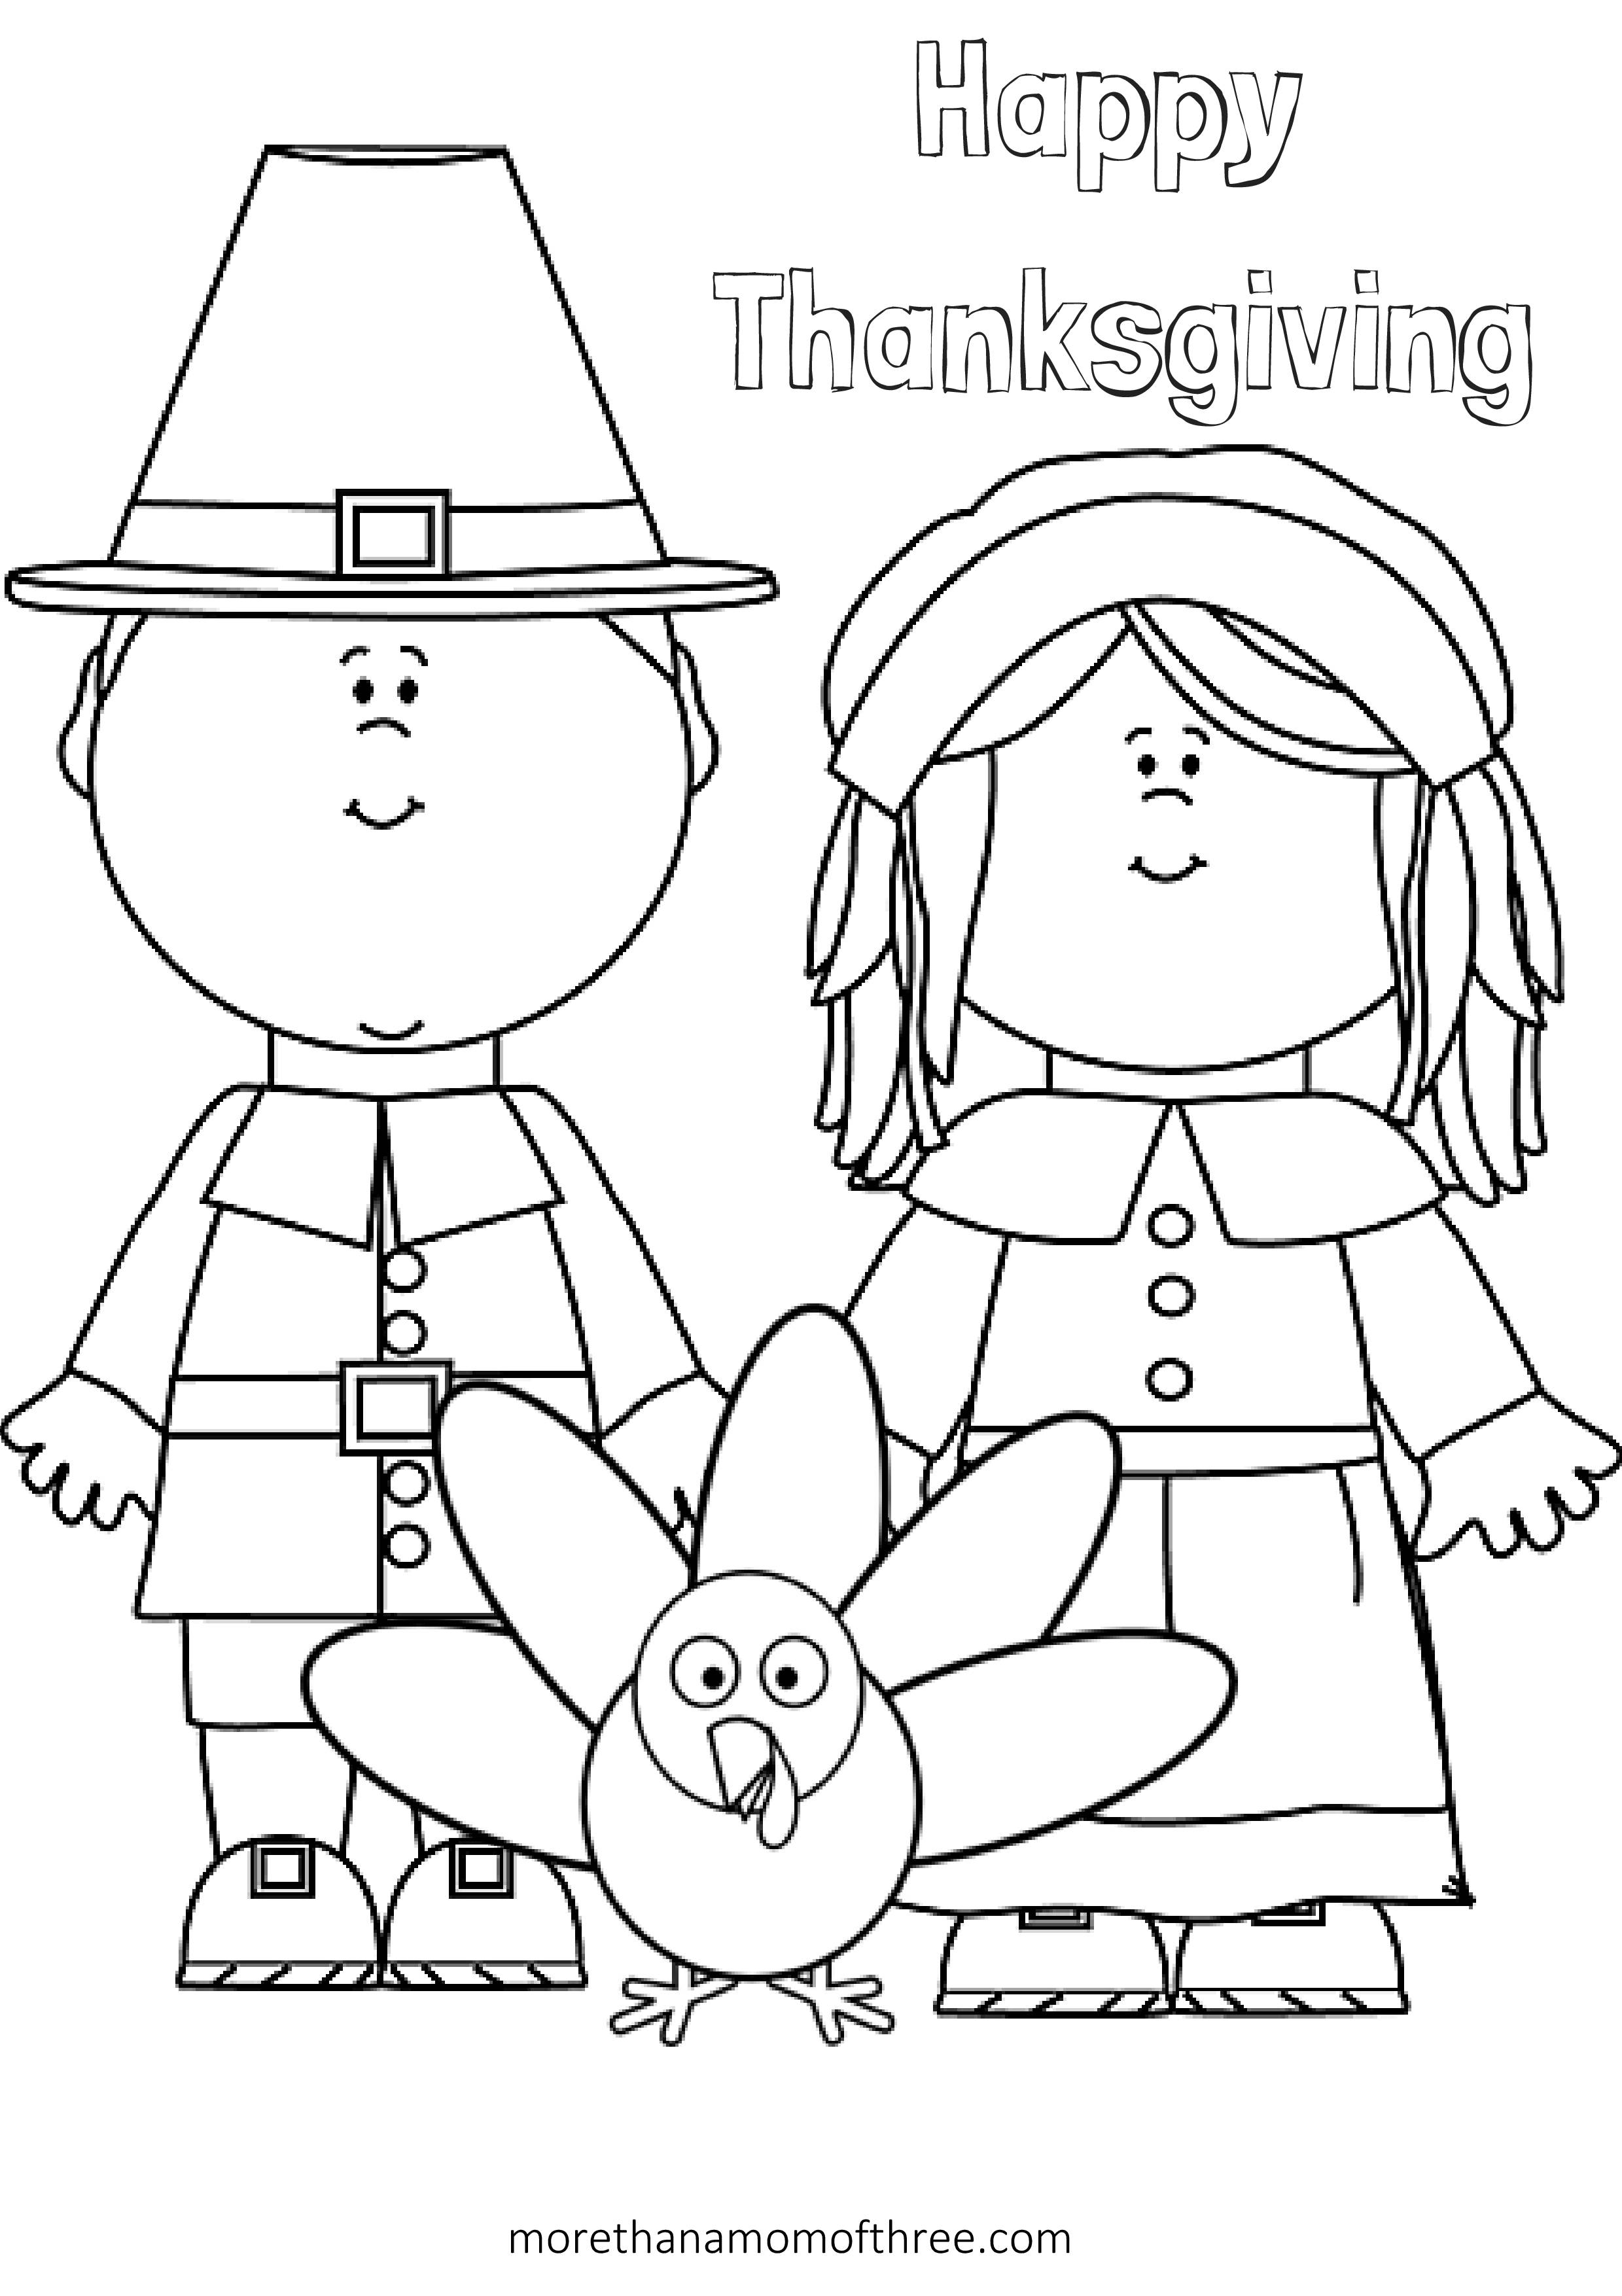 Free Thanksgiving Coloring Pages For Kindergarten